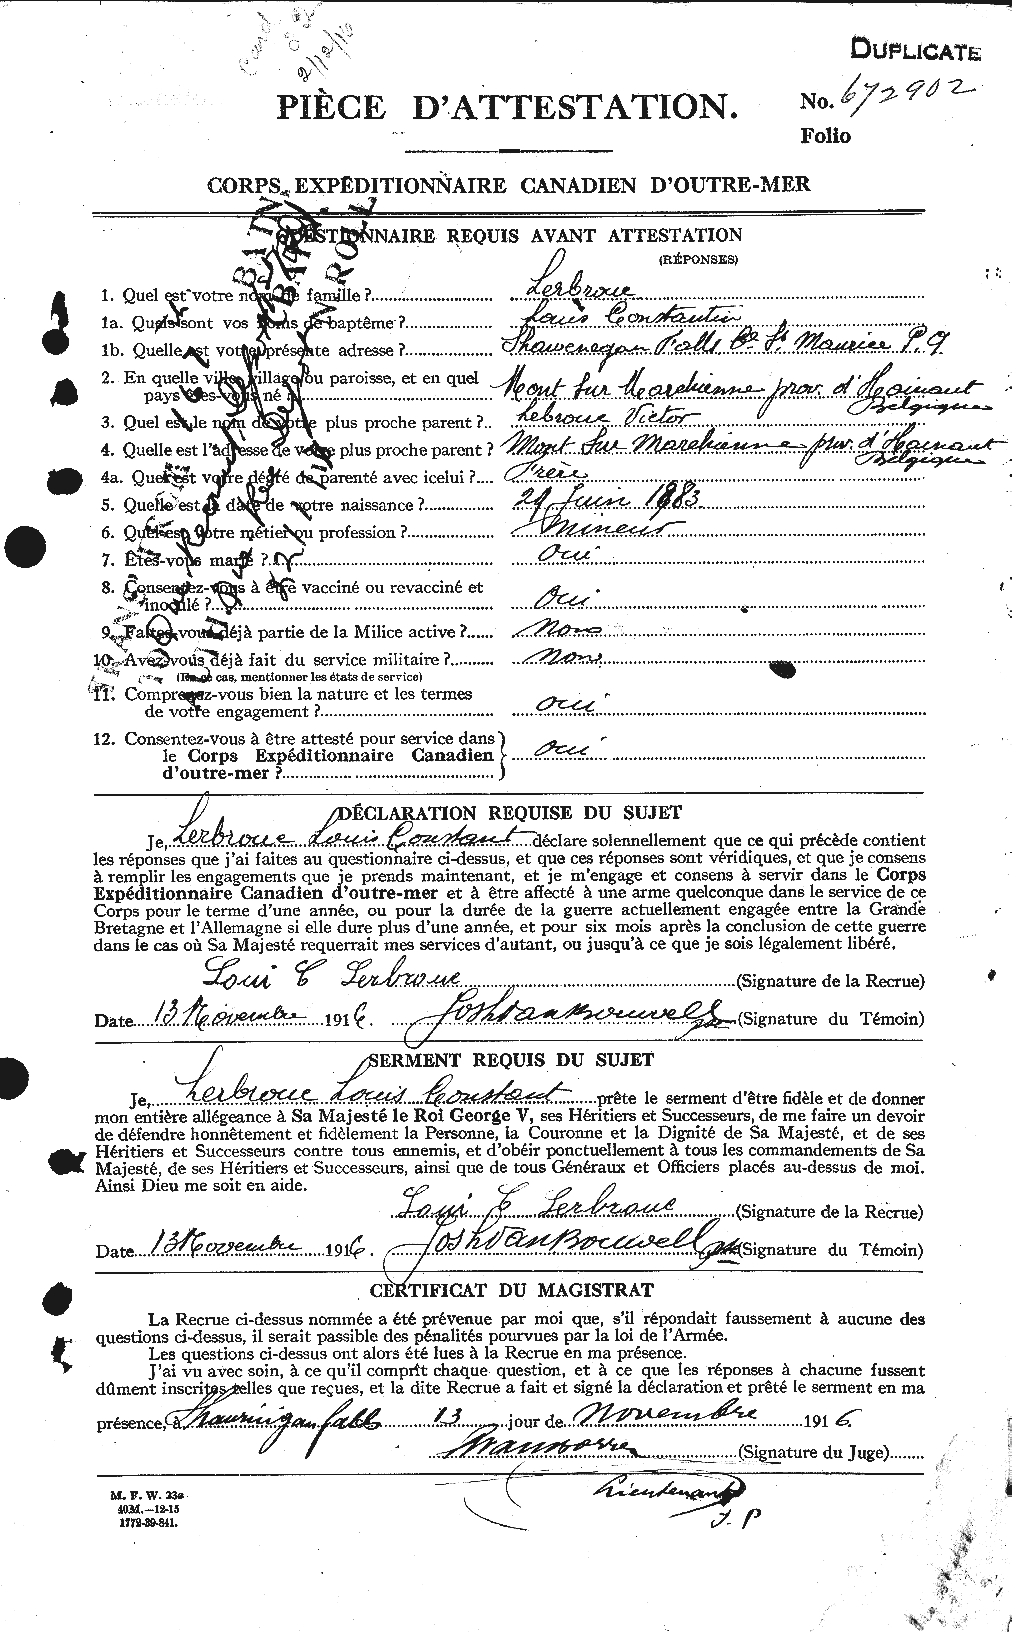 Personnel Records of the First World War - CEF 461540a